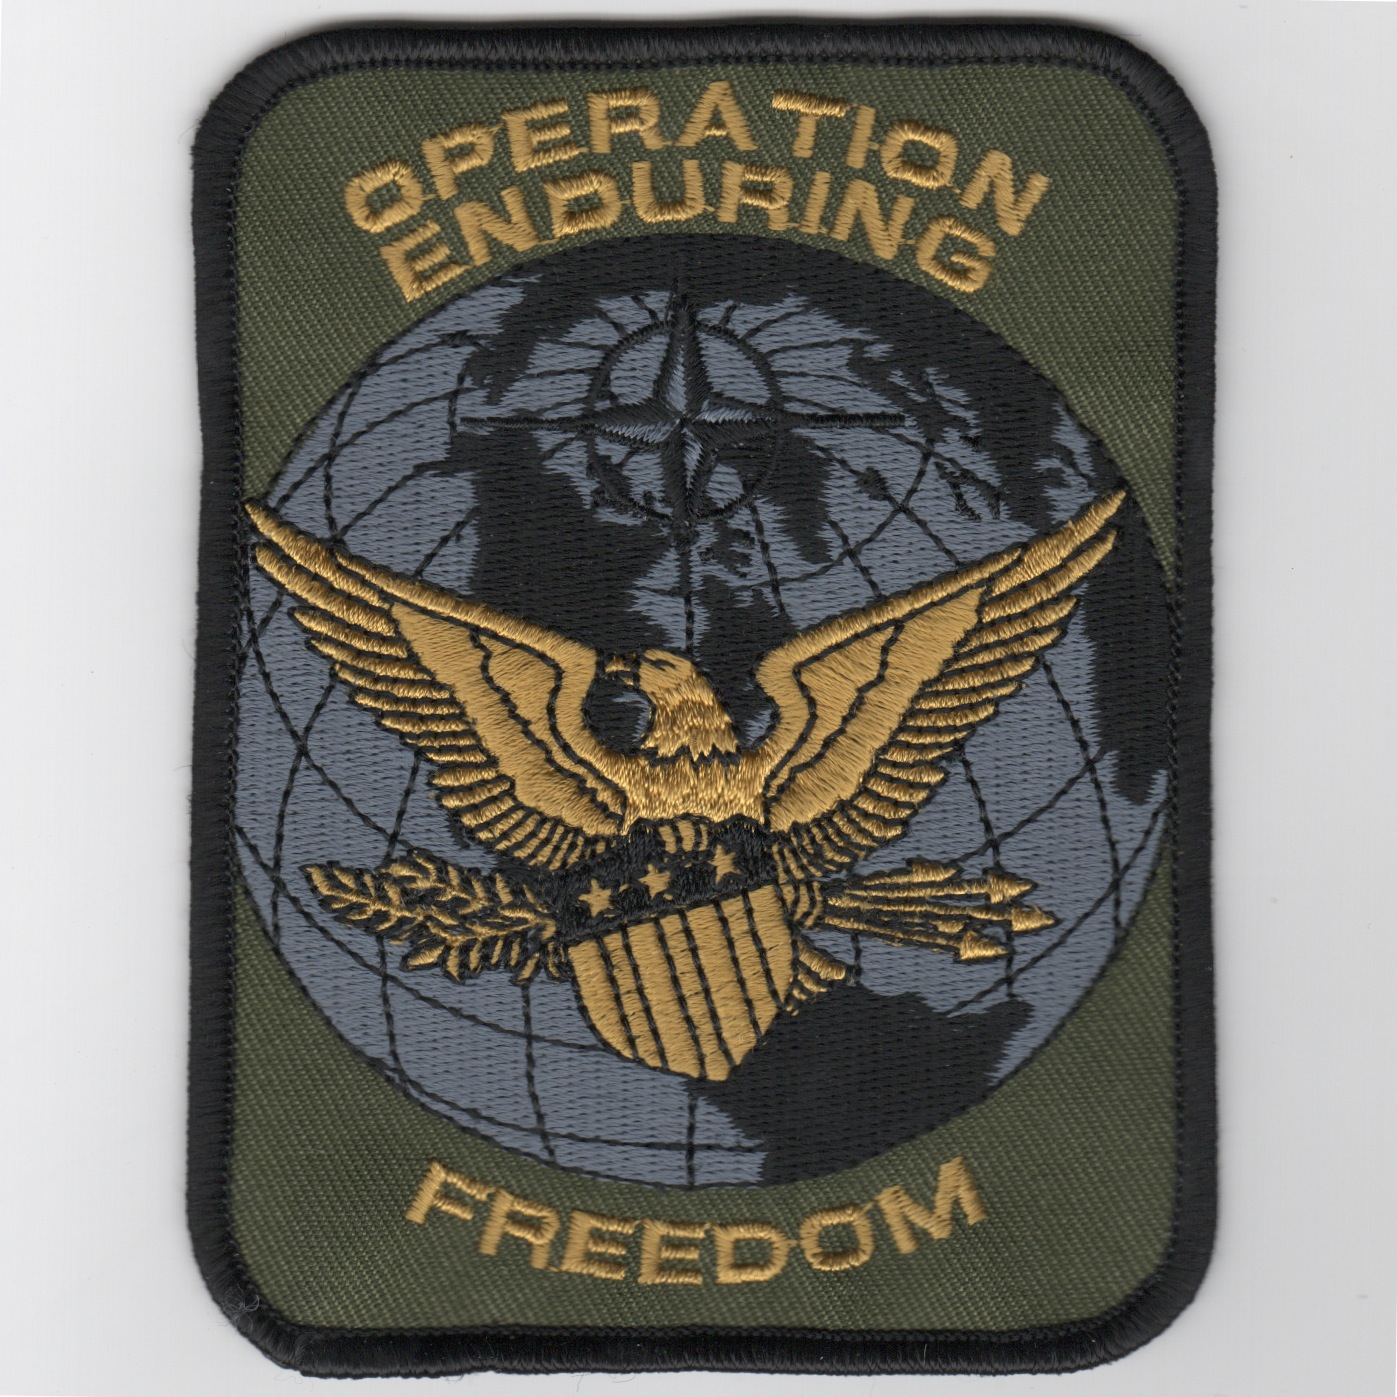 Operation ENDURING FREEDOM (Rect/Subd)